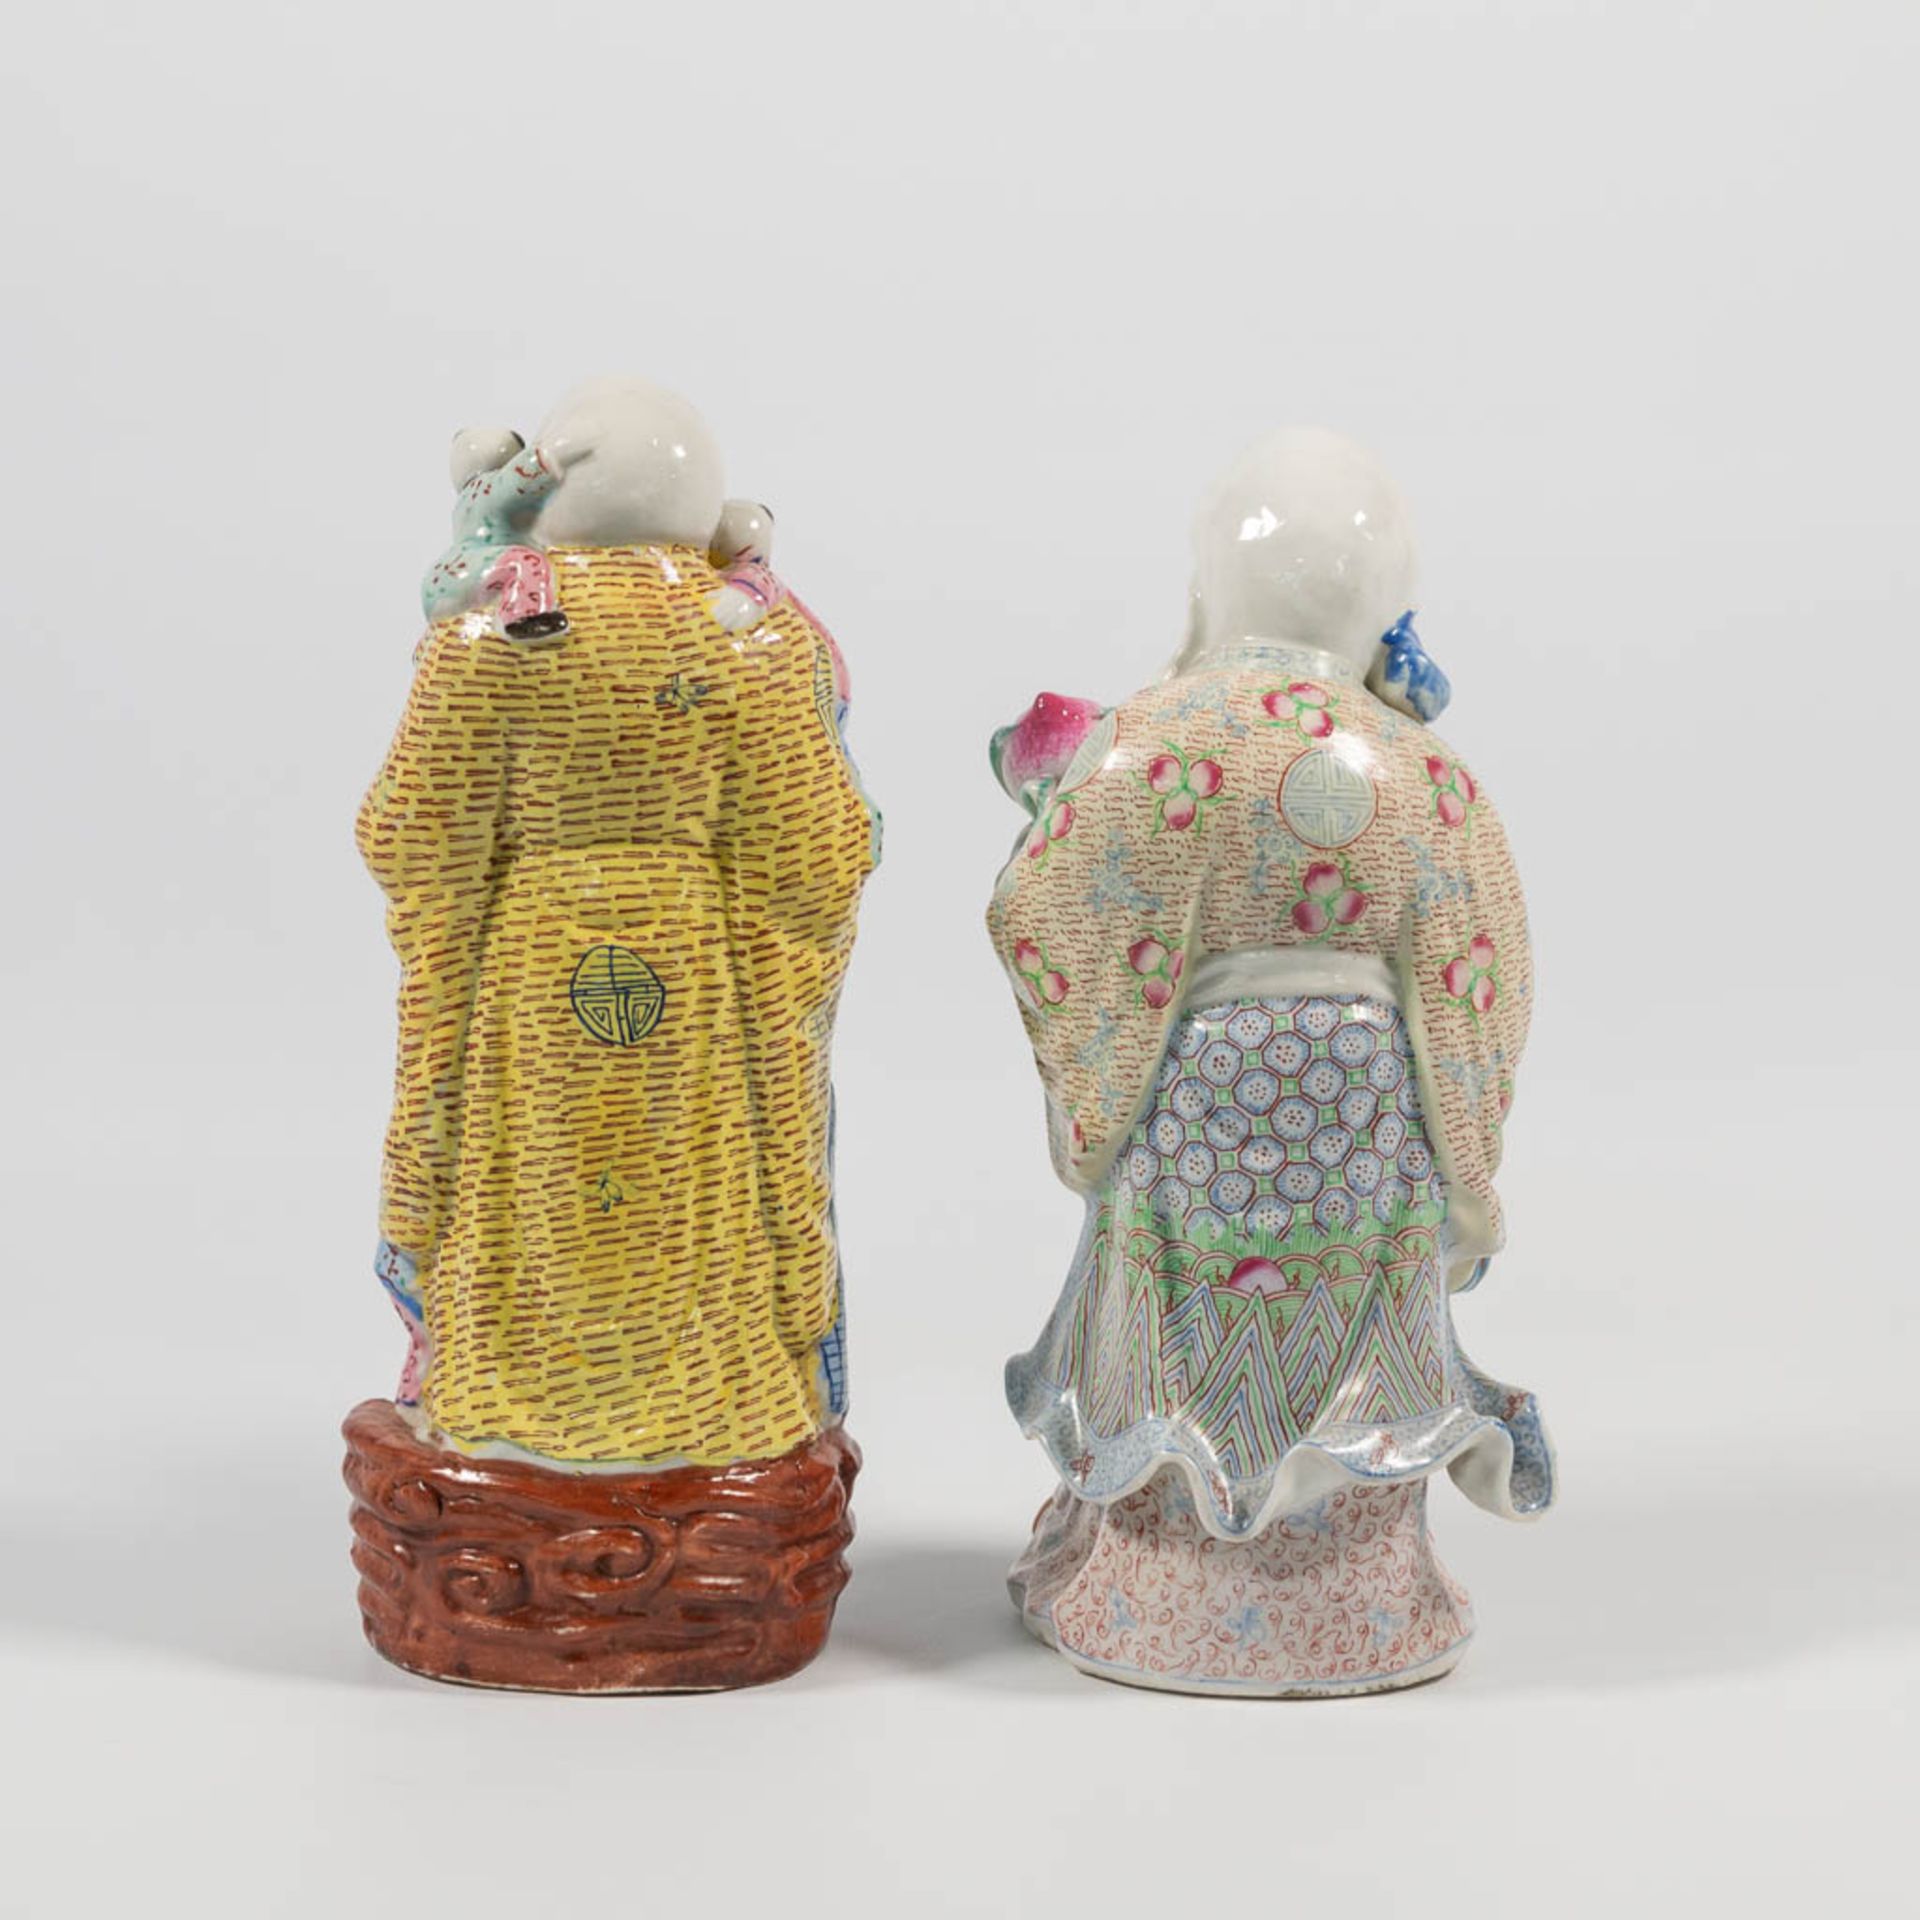 A Collection of 4 Chinese immortal figurines, made of porcelain. - Image 19 of 25